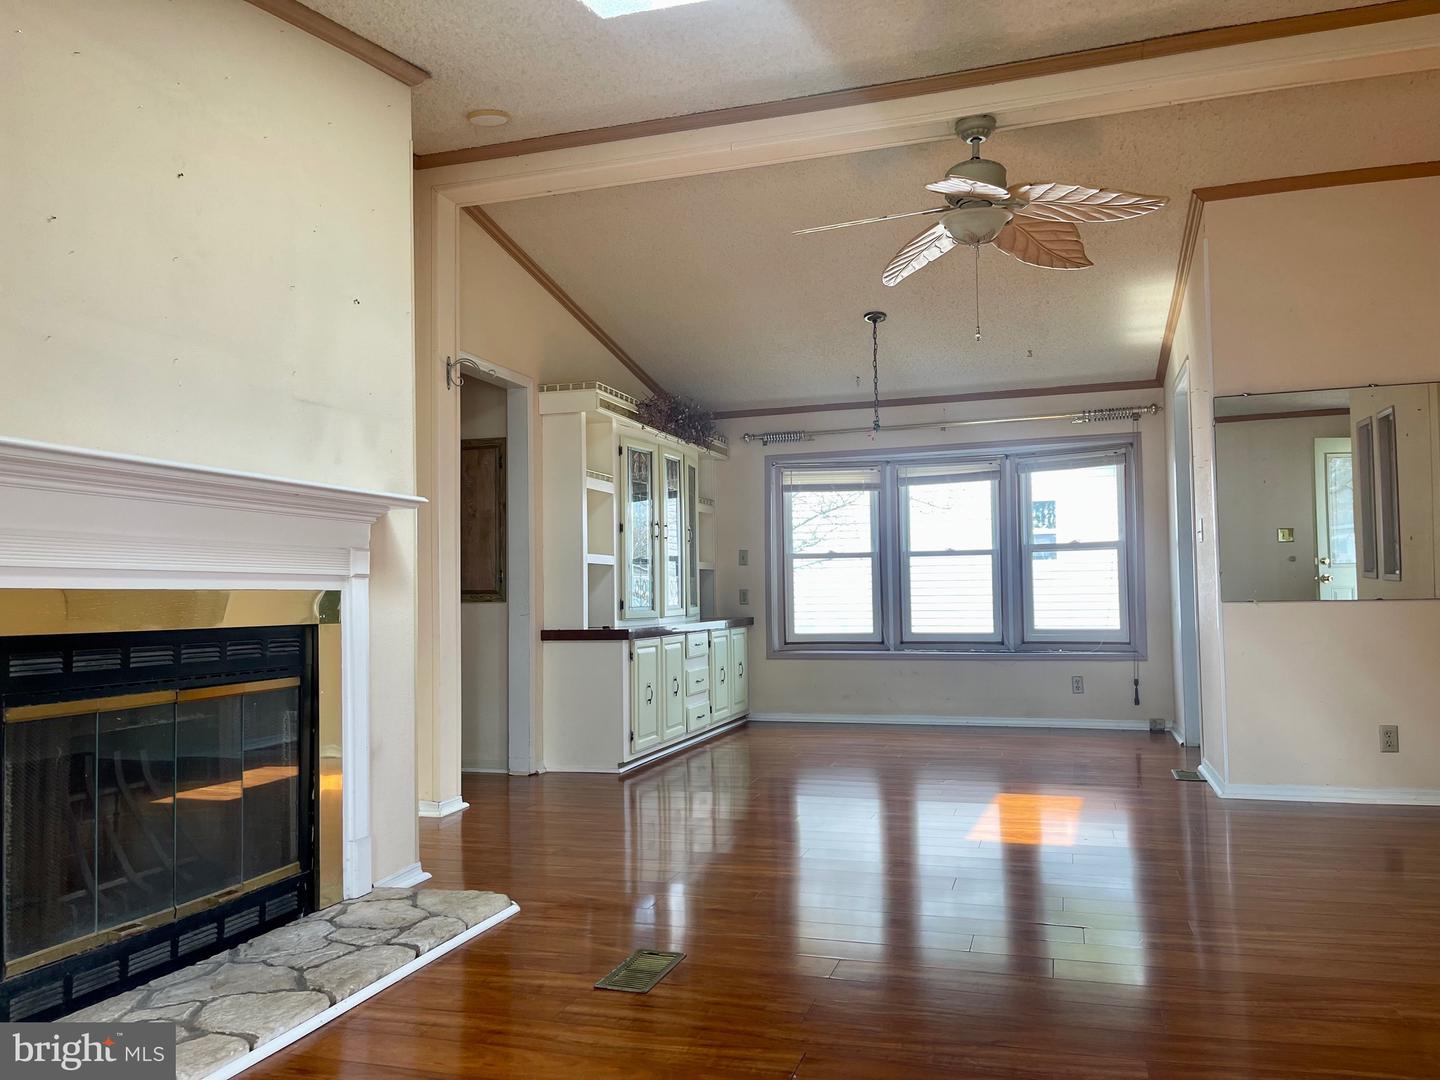 MDWO2019962-802957767030-2024-03-29-19-05-24 10 Ensign Dr | Berlin, MD Real Estate For Sale | MLS# Mdwo2019962  - 1st Choice Properties